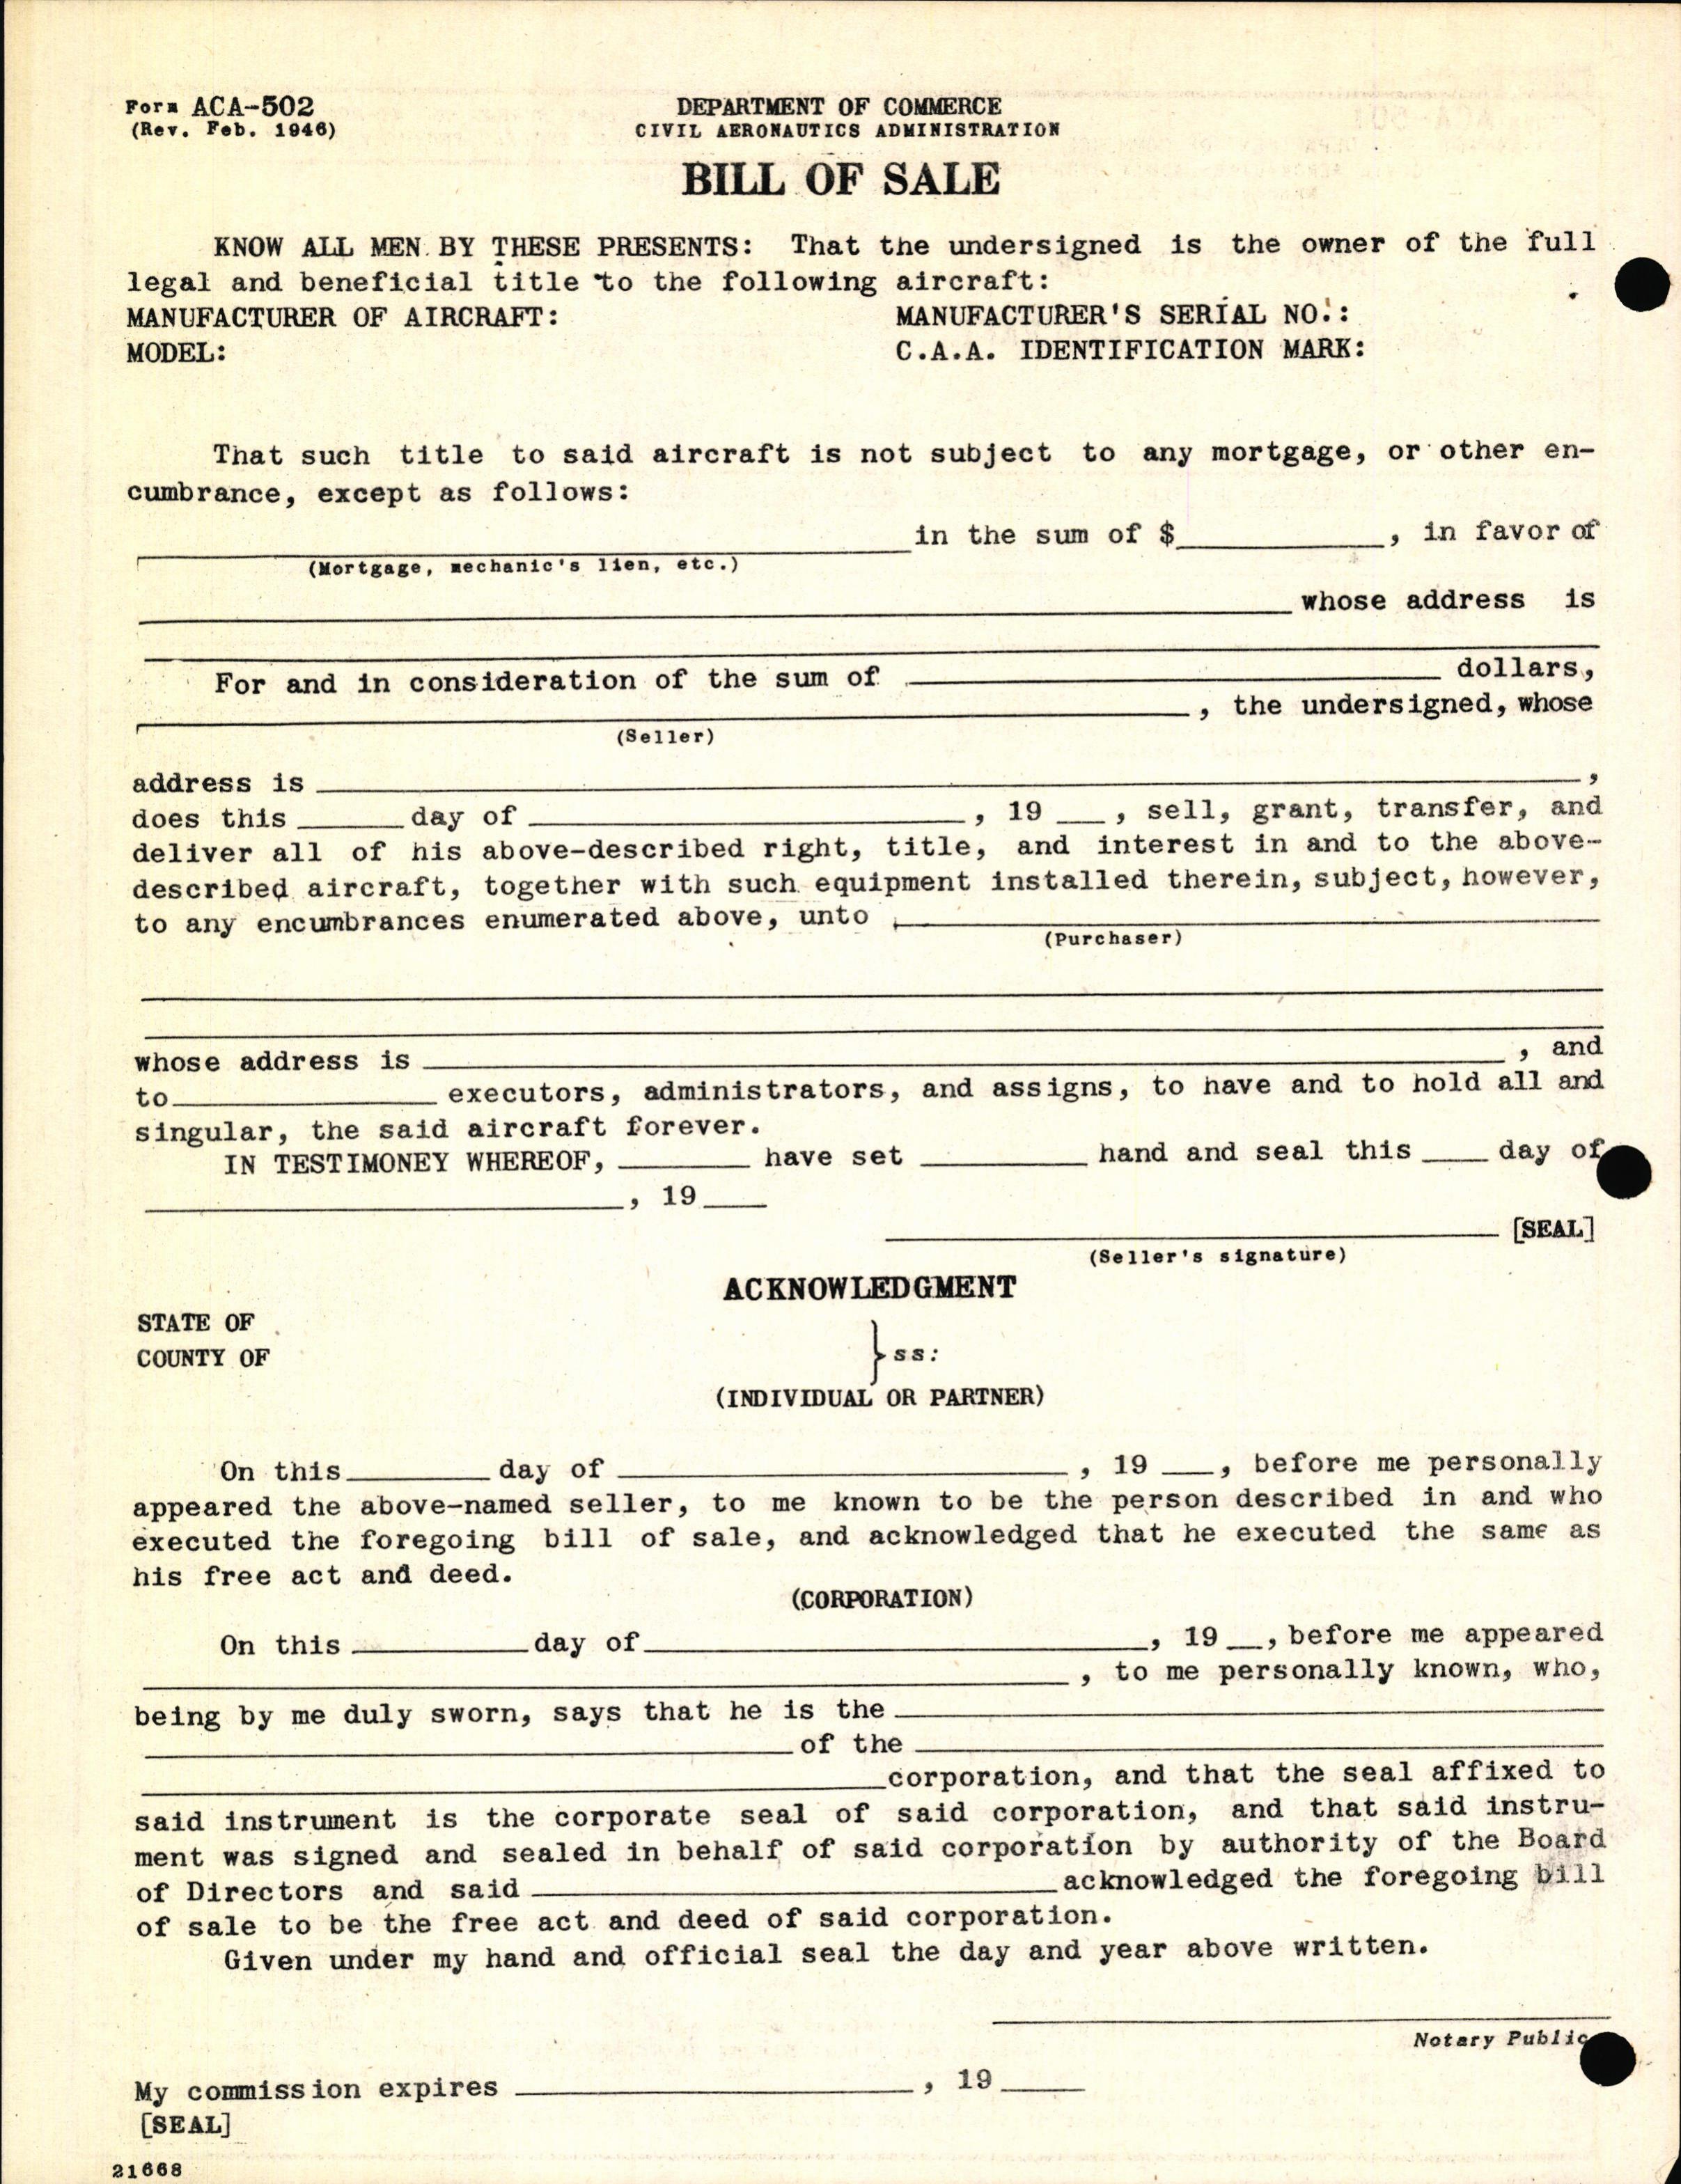 Sample page 4 from AirCorps Library document: Technical Information for Serial Number 2022